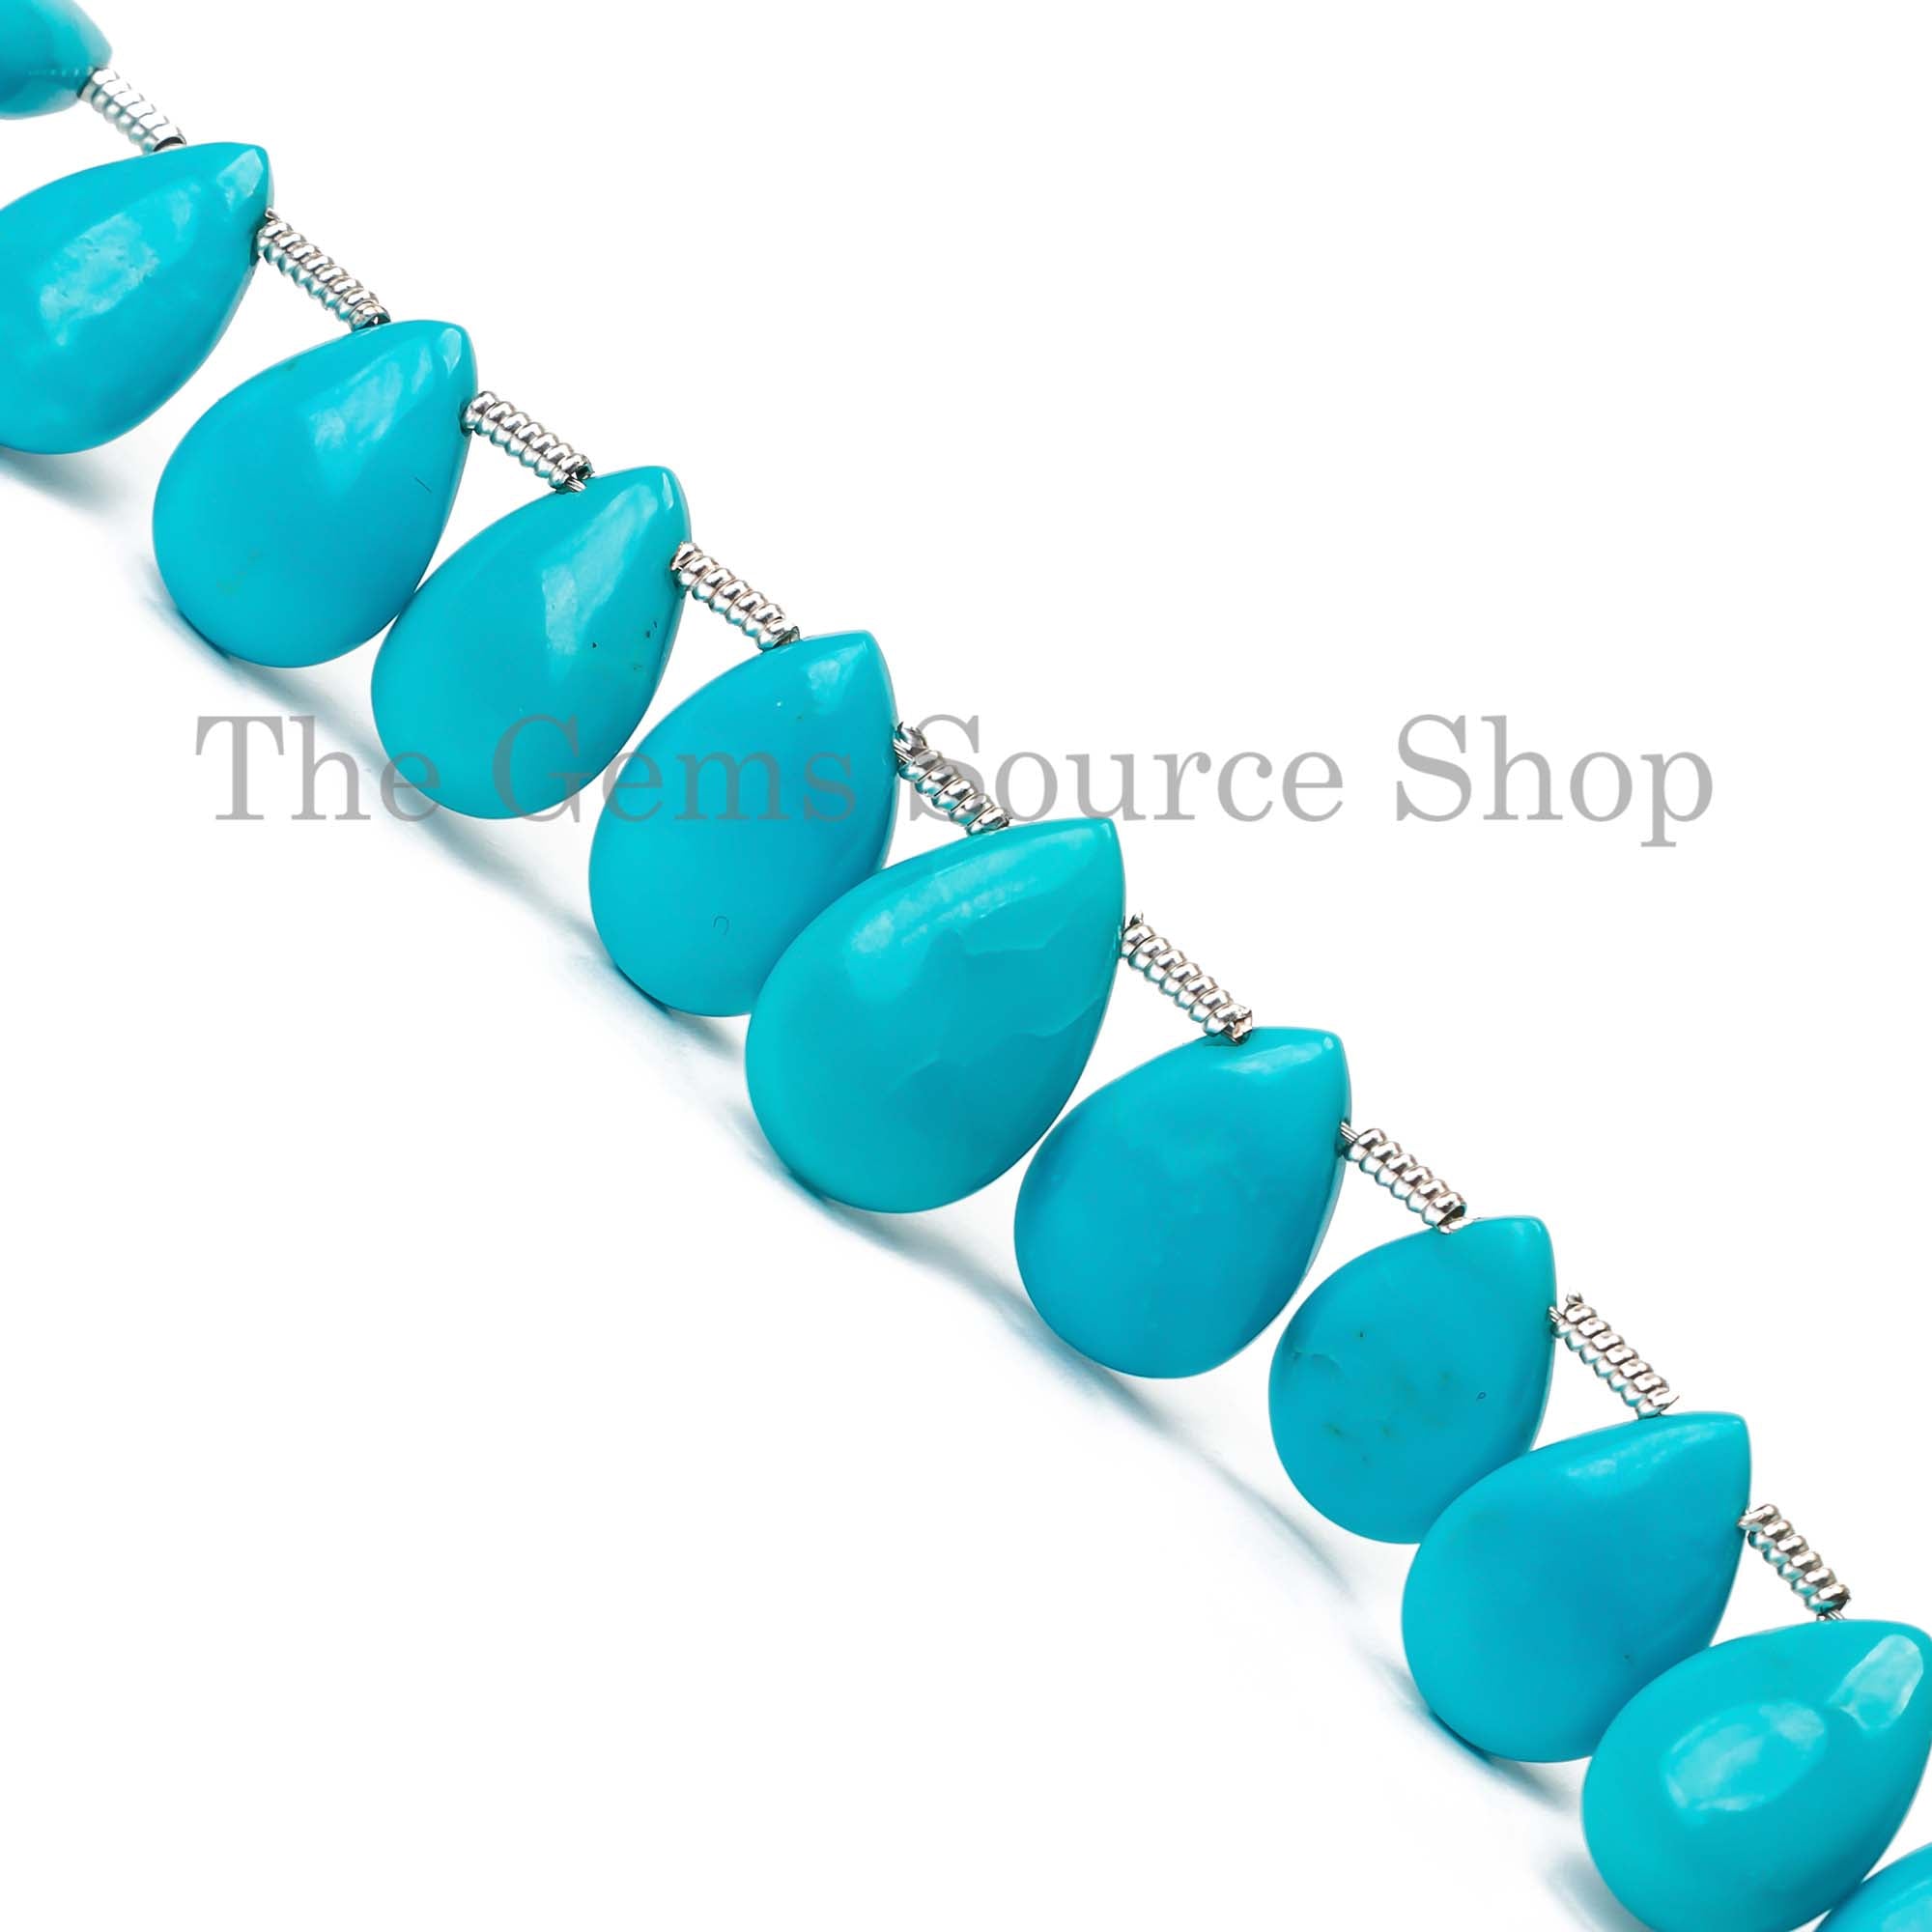 Sleeping Beauty Turquoise Smooth Pear Briolettes, Wholesale Beads